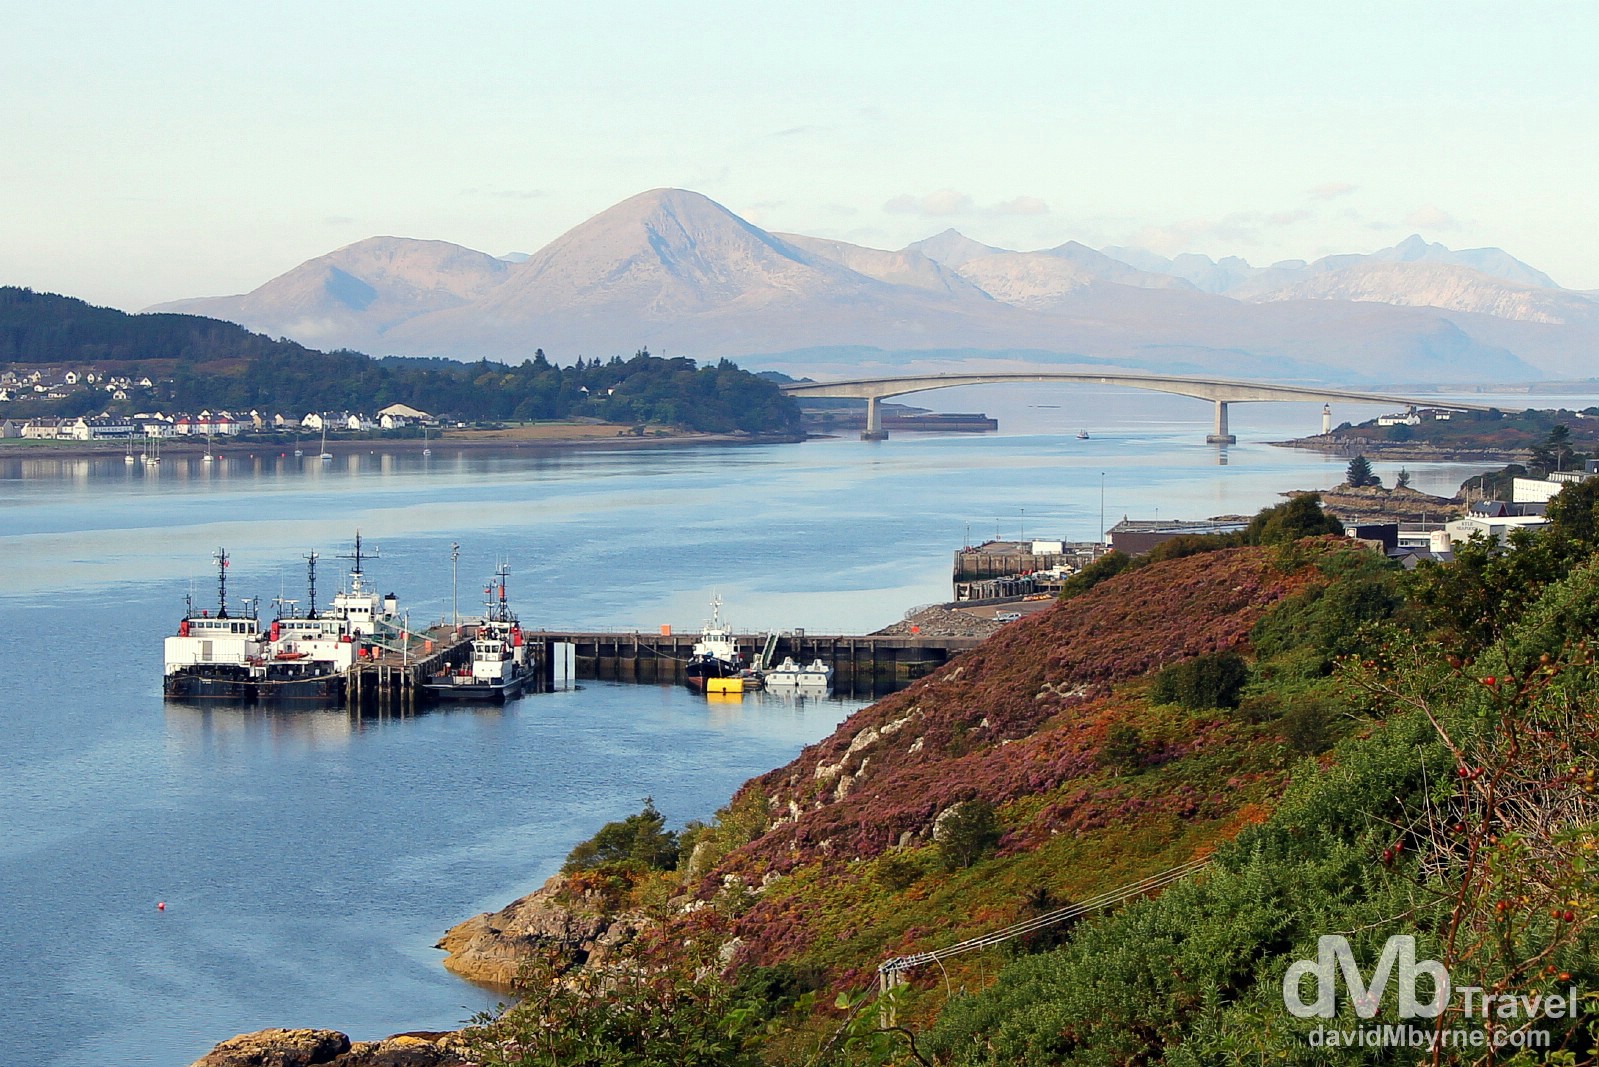 The mountains of the Isle of Skye & The Skye Bridge spanning Loch Alsh as seen from the A87 entering Kyle of Lochalsh, Highland, Scotland. September 17, 2014.